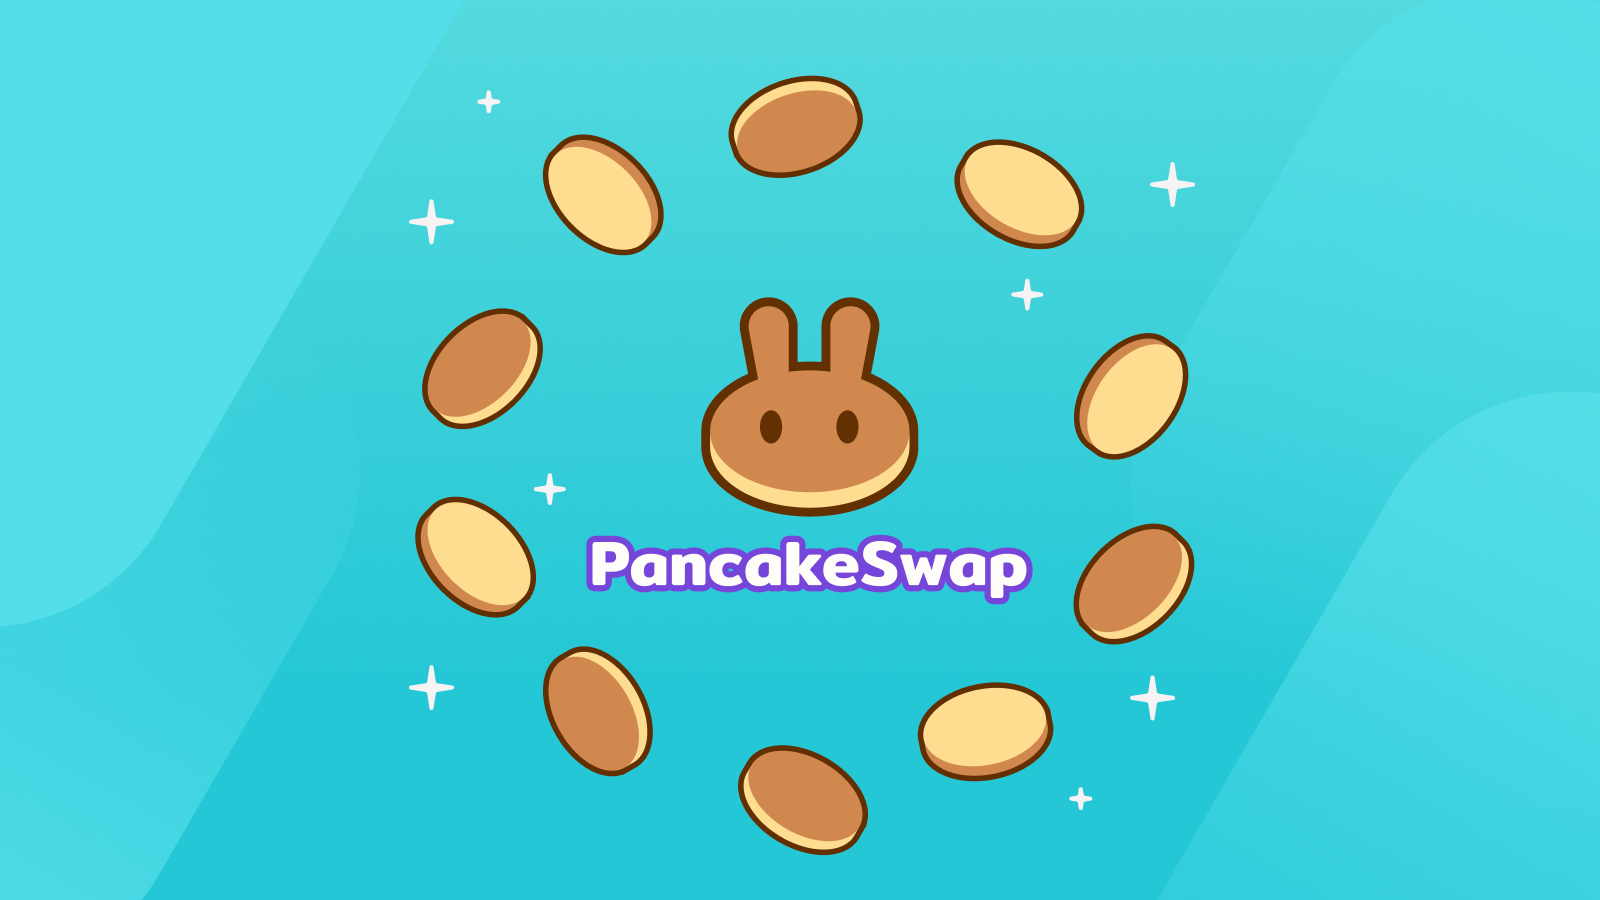 How to use PancakeSwap - Guide